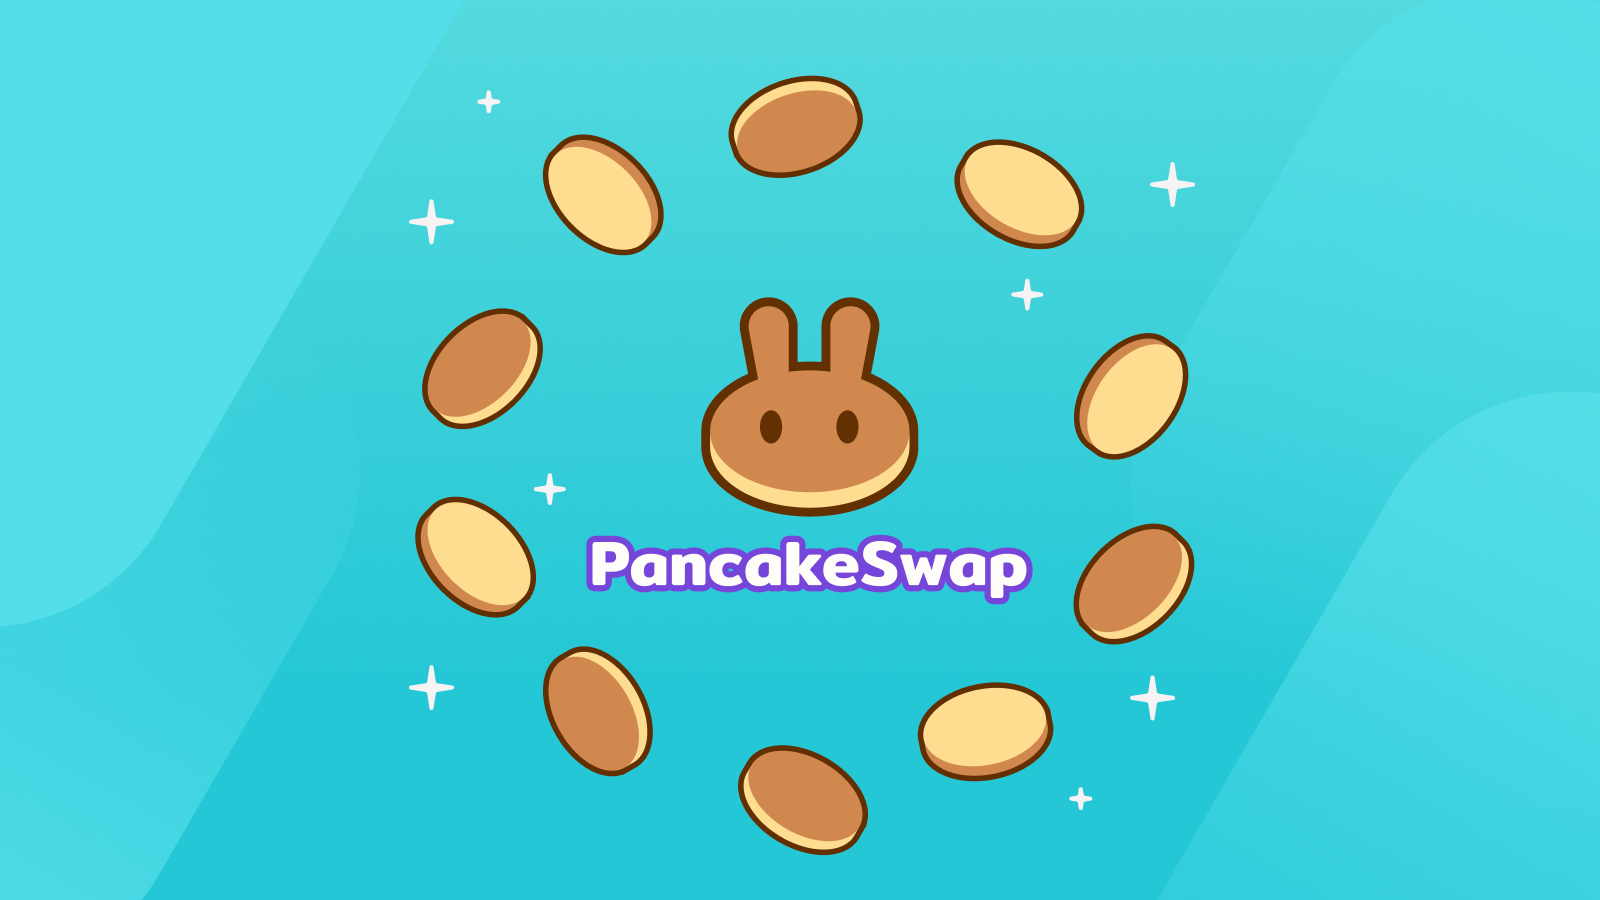 How to use PancakeSwap - Guide